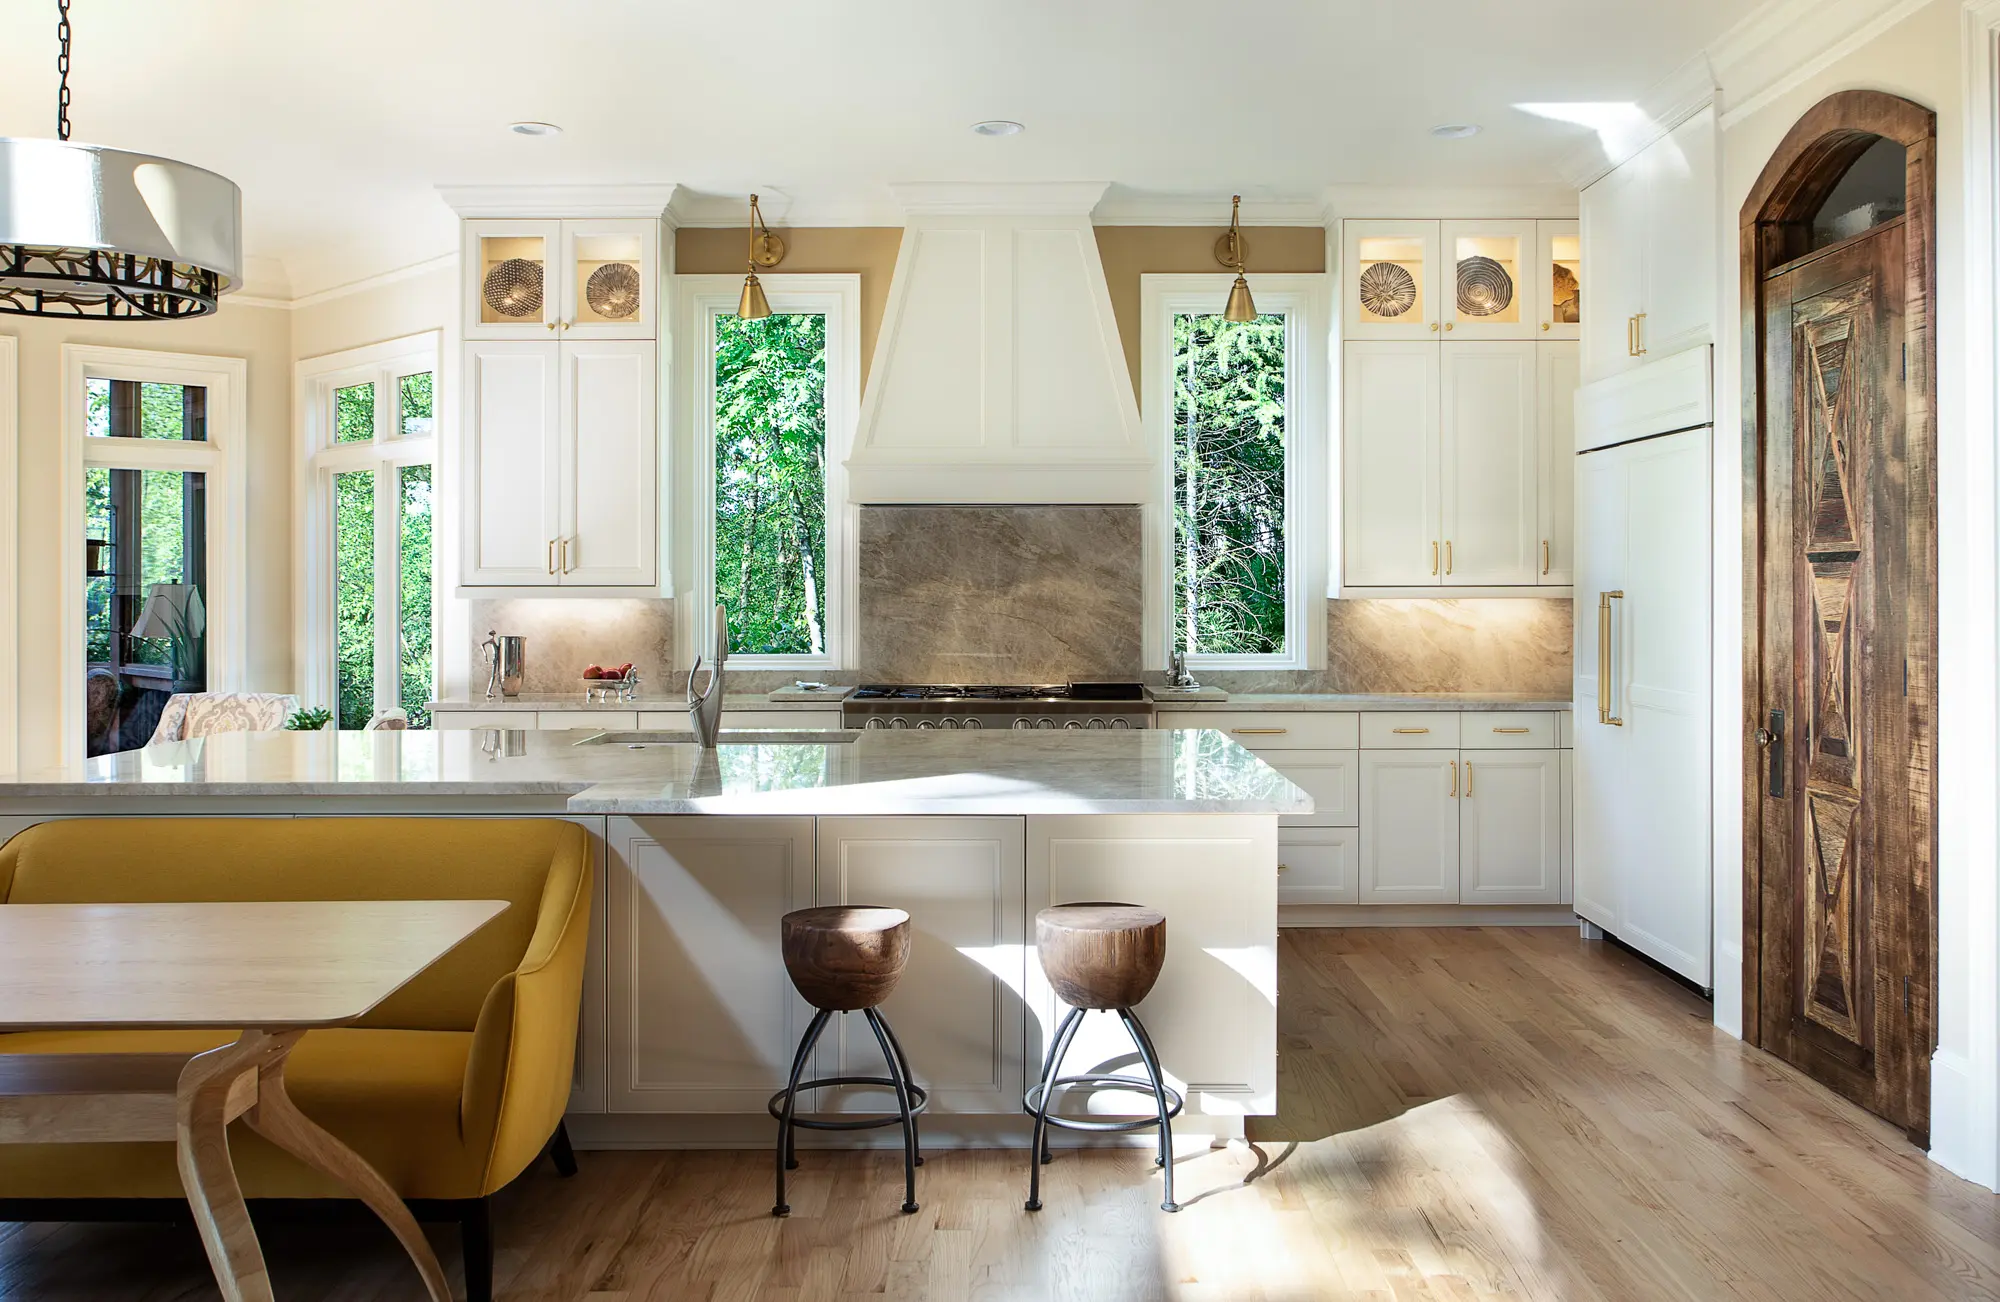 Bright contemporary kitchen remodel with white cabinetry and marble countertops by Michael James Remodeling.